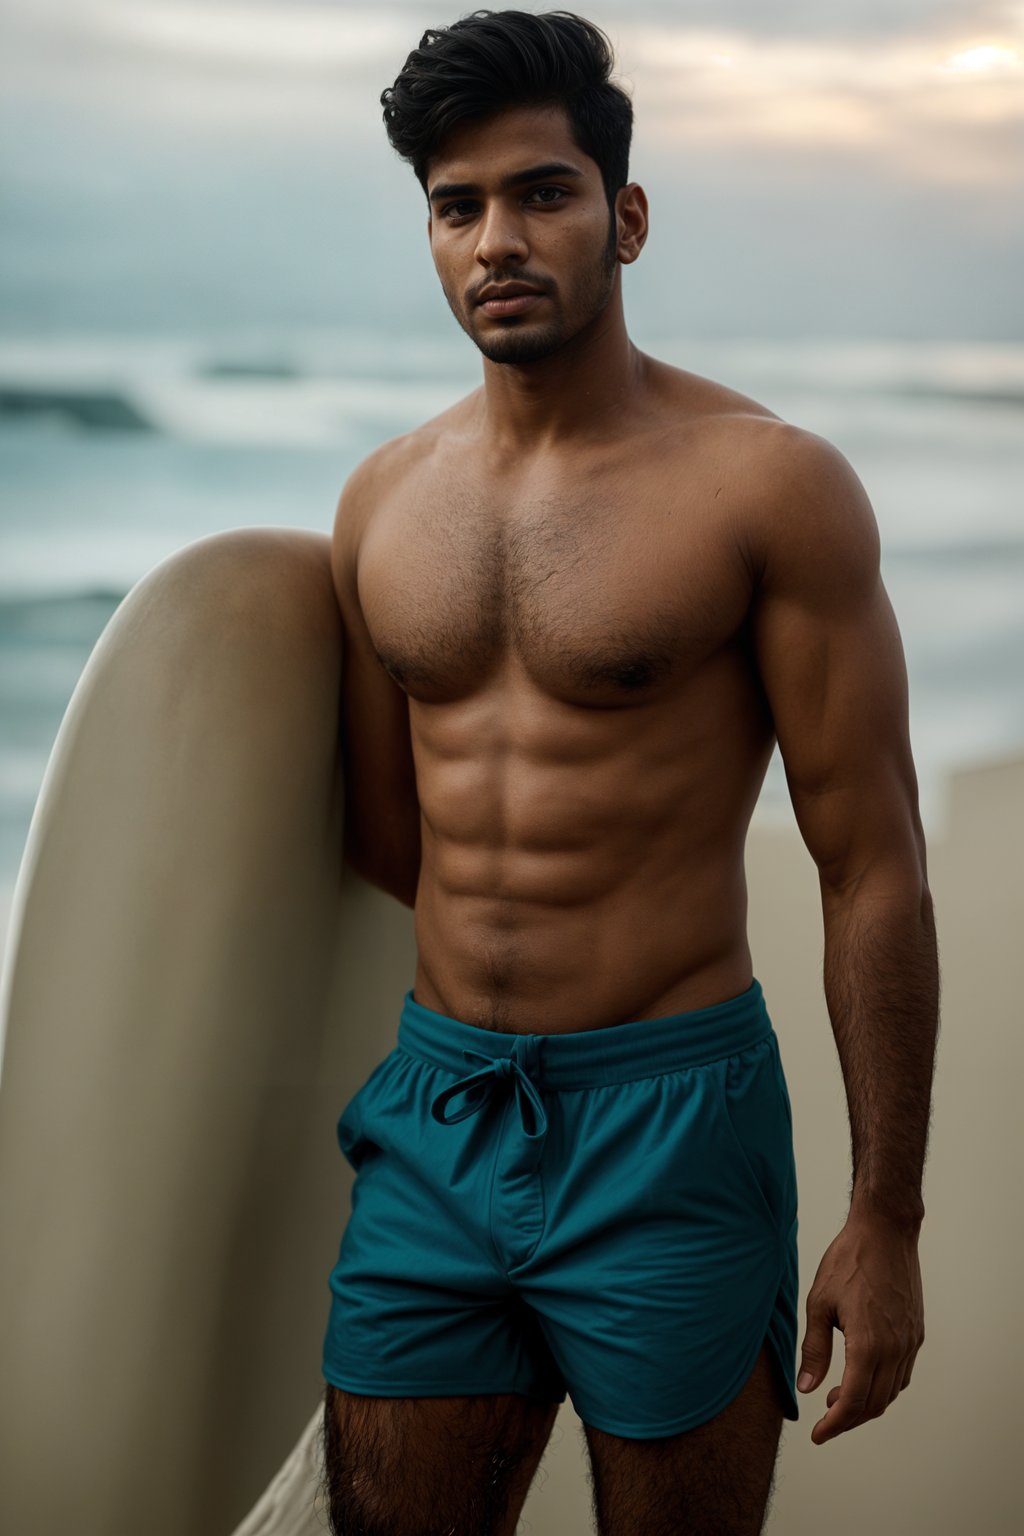 man in  board shorts with surfboard on the beach, ready to ride the waves